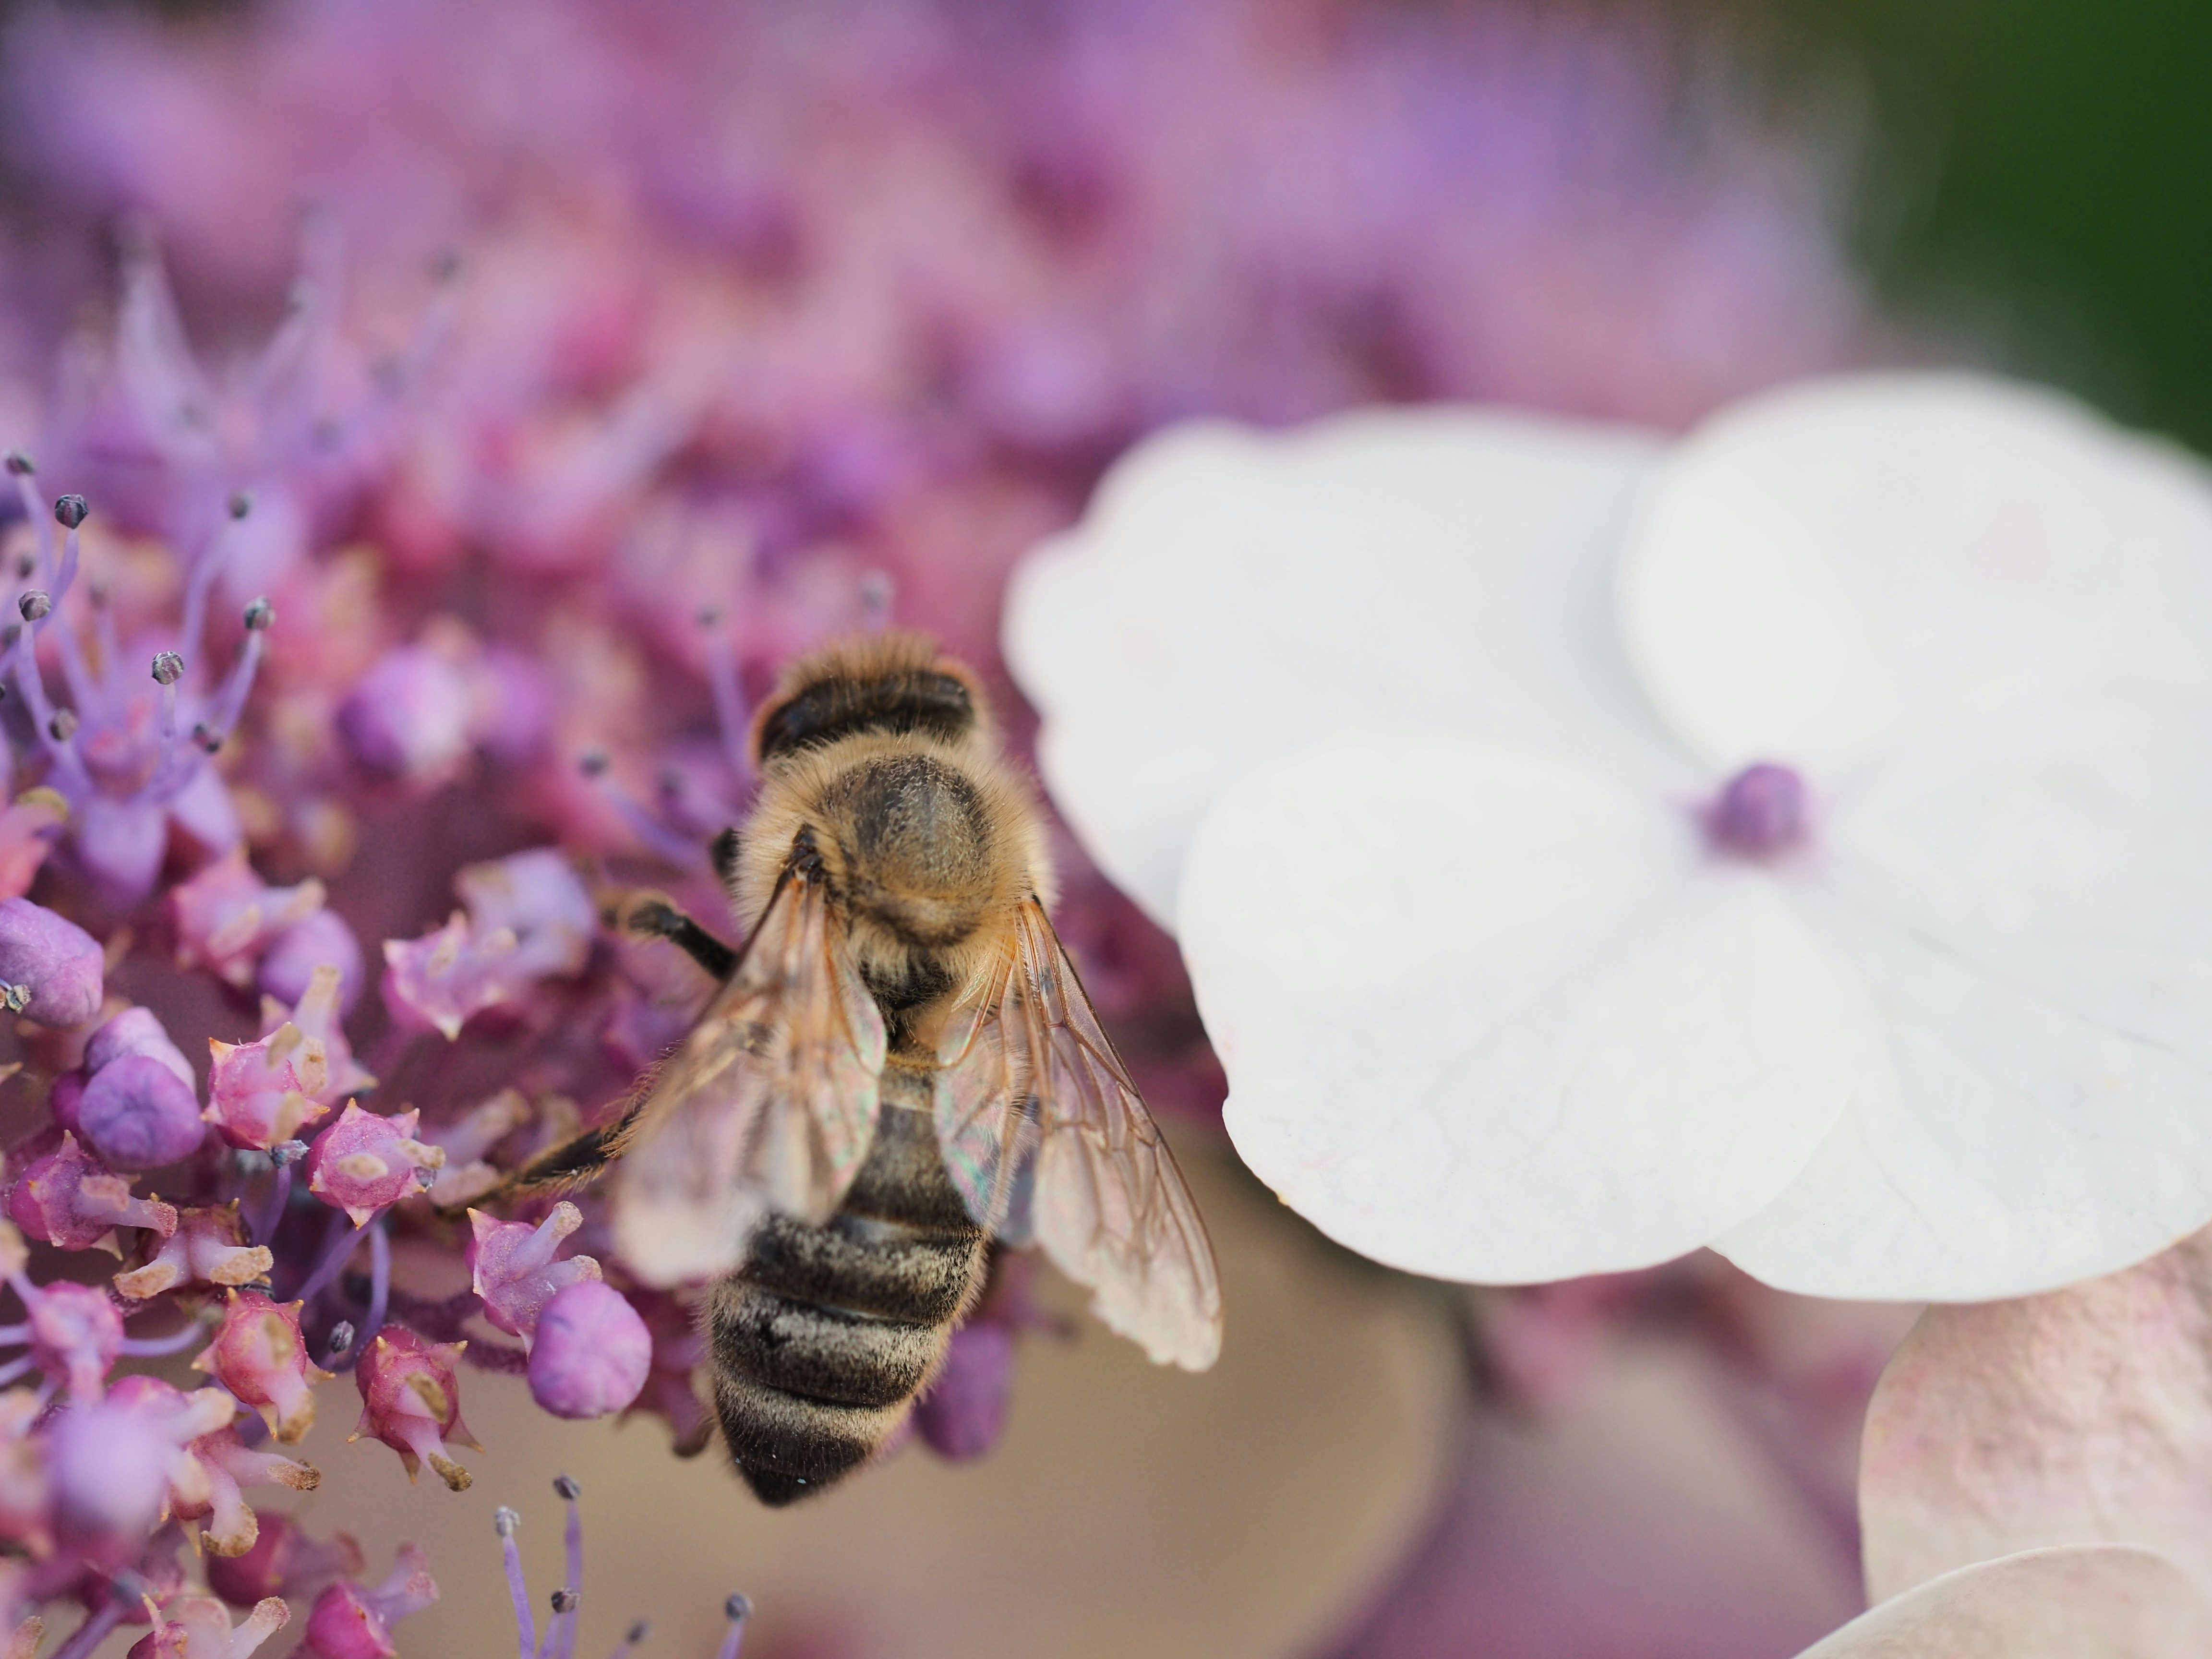 Stay busy like a bee and make use of our amazing catalogue of bee pictures. Carefully curated and of the highest quality, Unsplash's bee pictures are free for everyone to use.